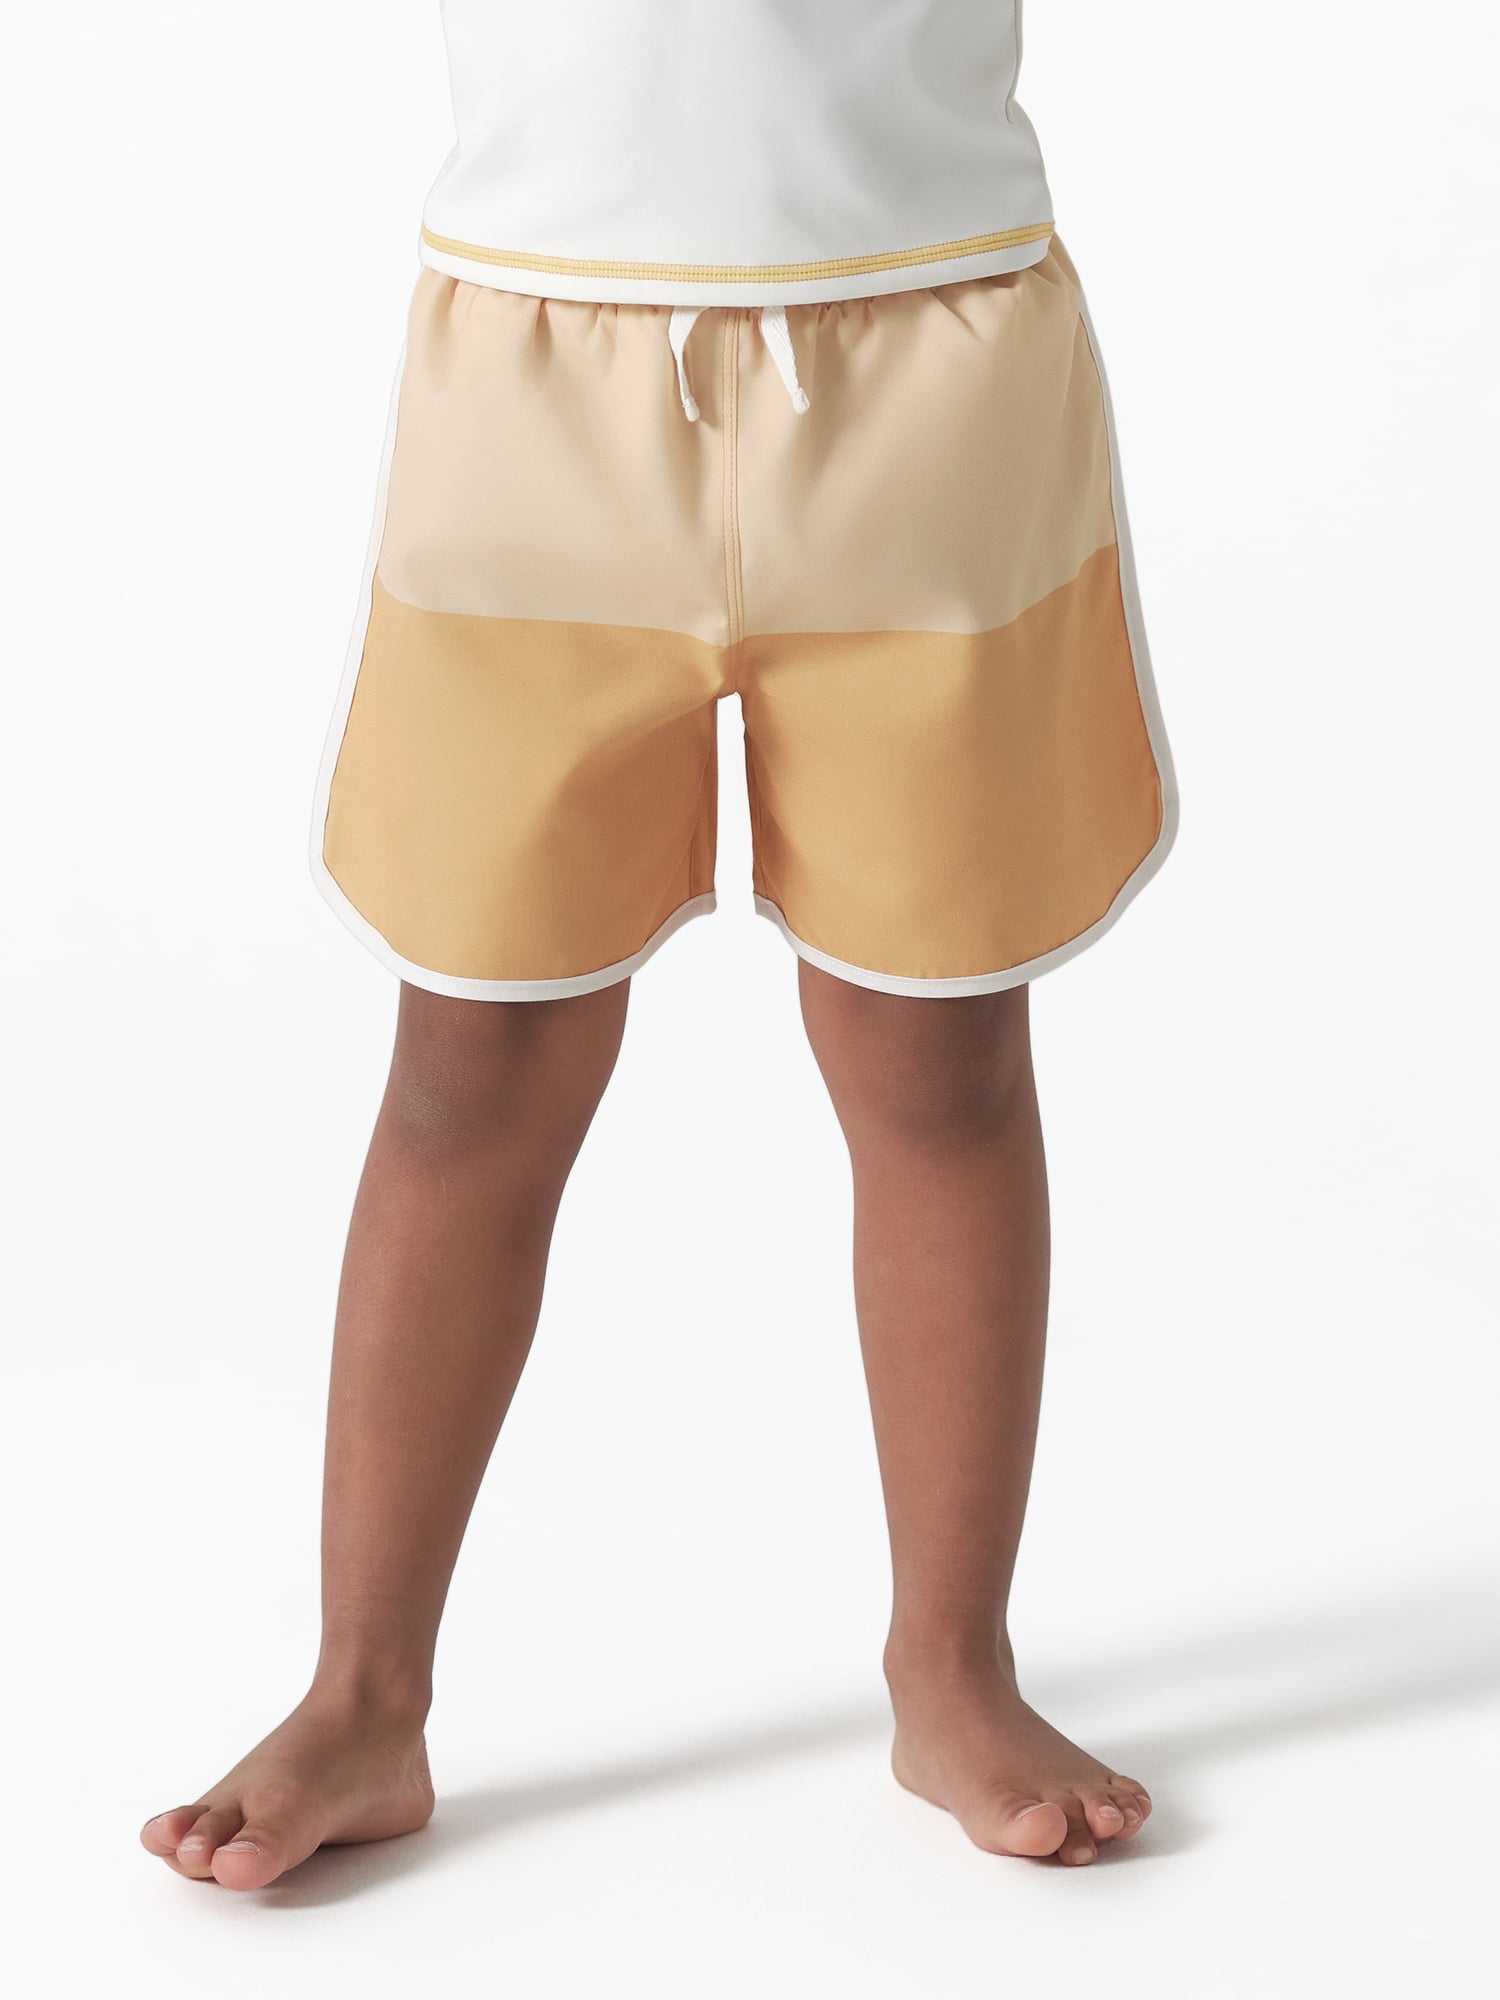 Modern Moments by Gerber Baby and Toddler Boy Swim Trunks with UPF 50+, Sizes 12M-5T